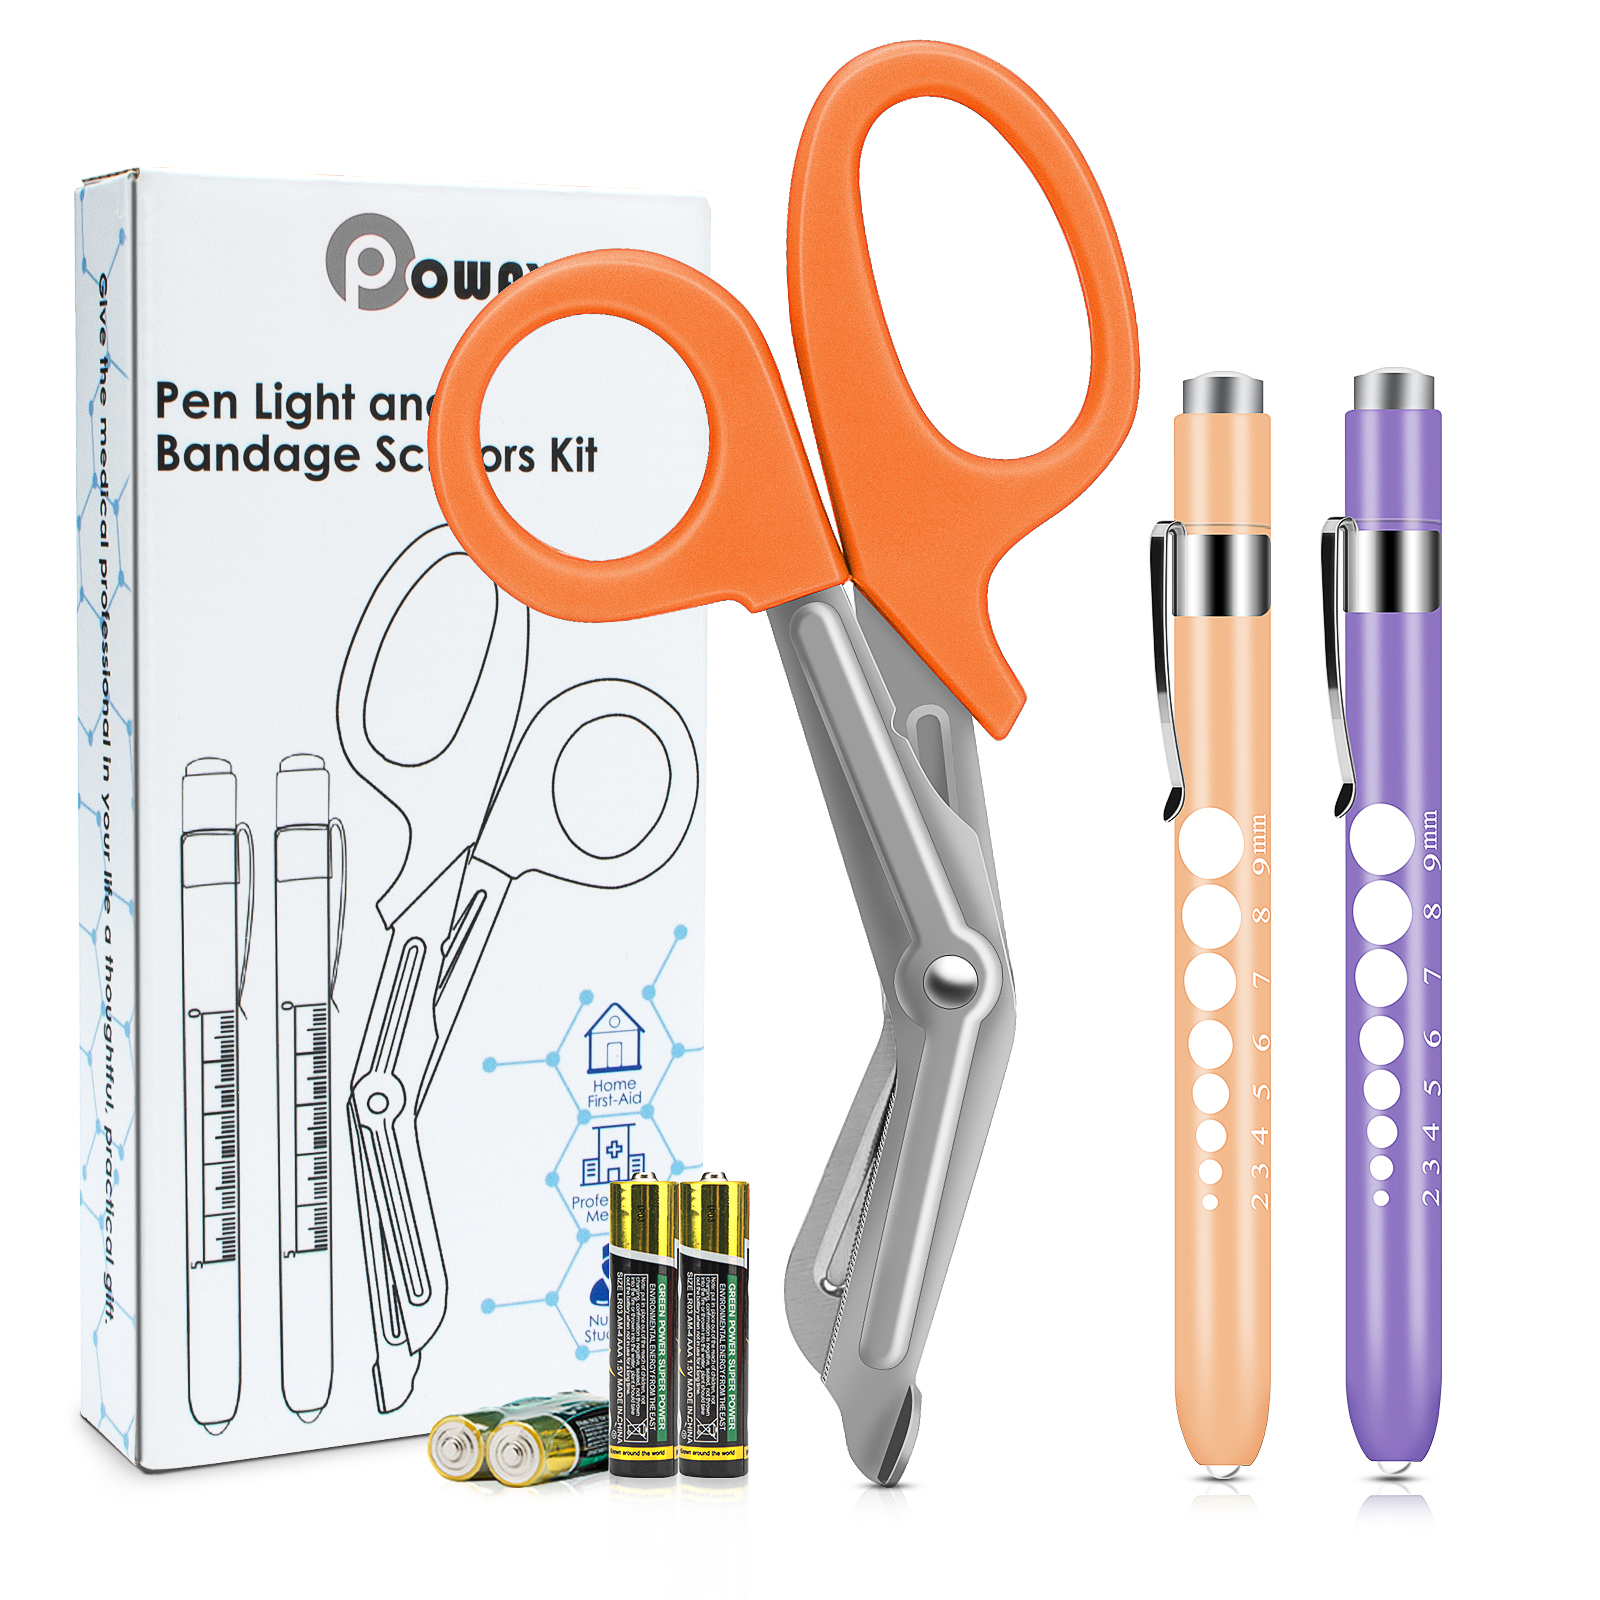 OPOWAY Medical Pen Light and Orange Bandage Scissors 3 Pack, Two Reusable LED Pupil Penlight,  with Free Batteries